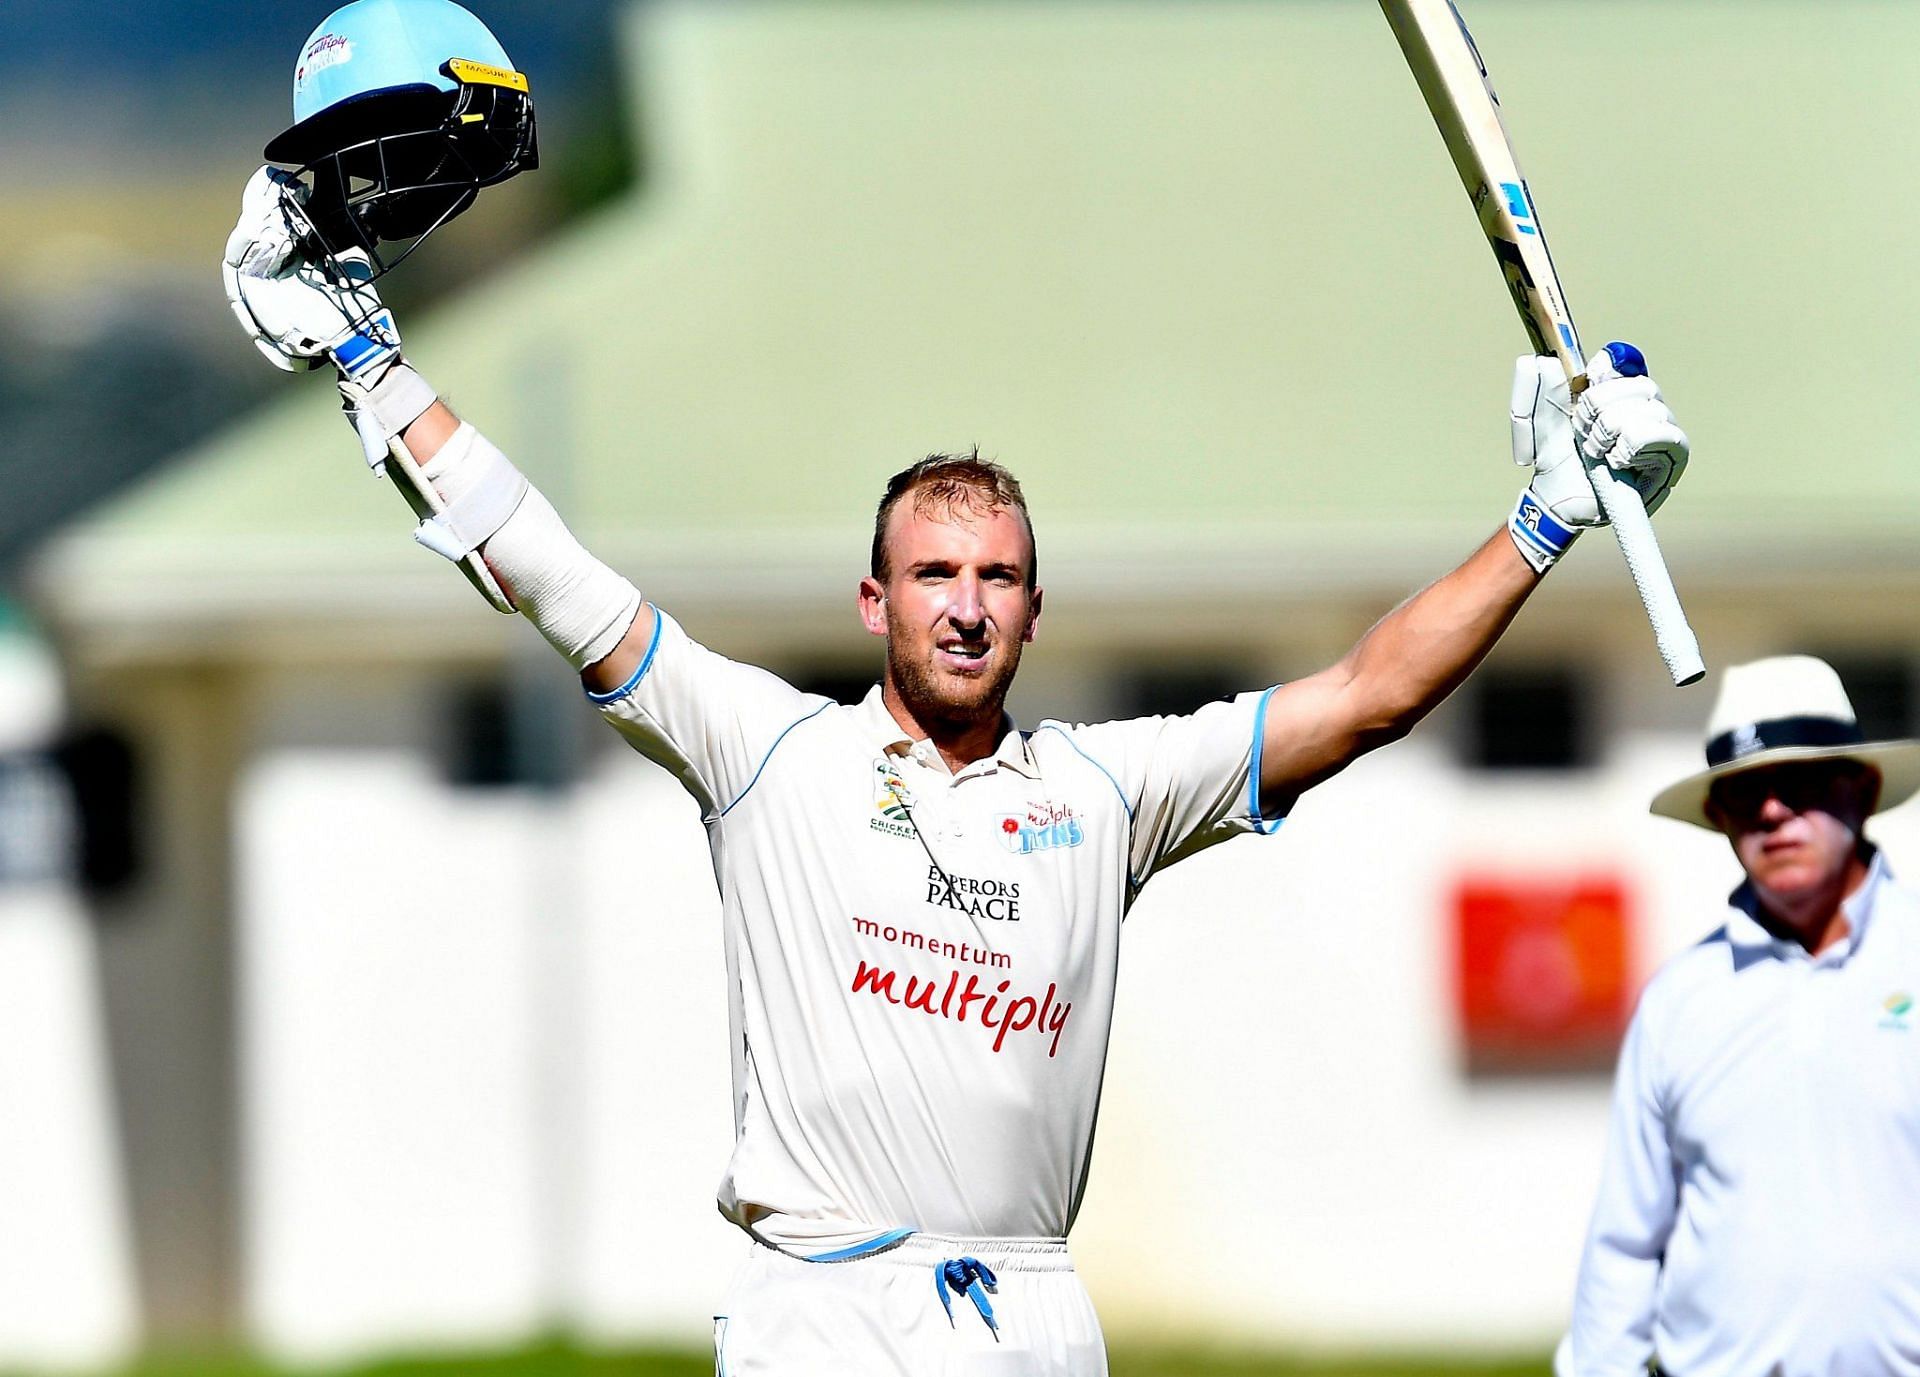 Neil Brand, who is yet to make his international debut, will captain South Africa against New Zealand. [P/C: X]